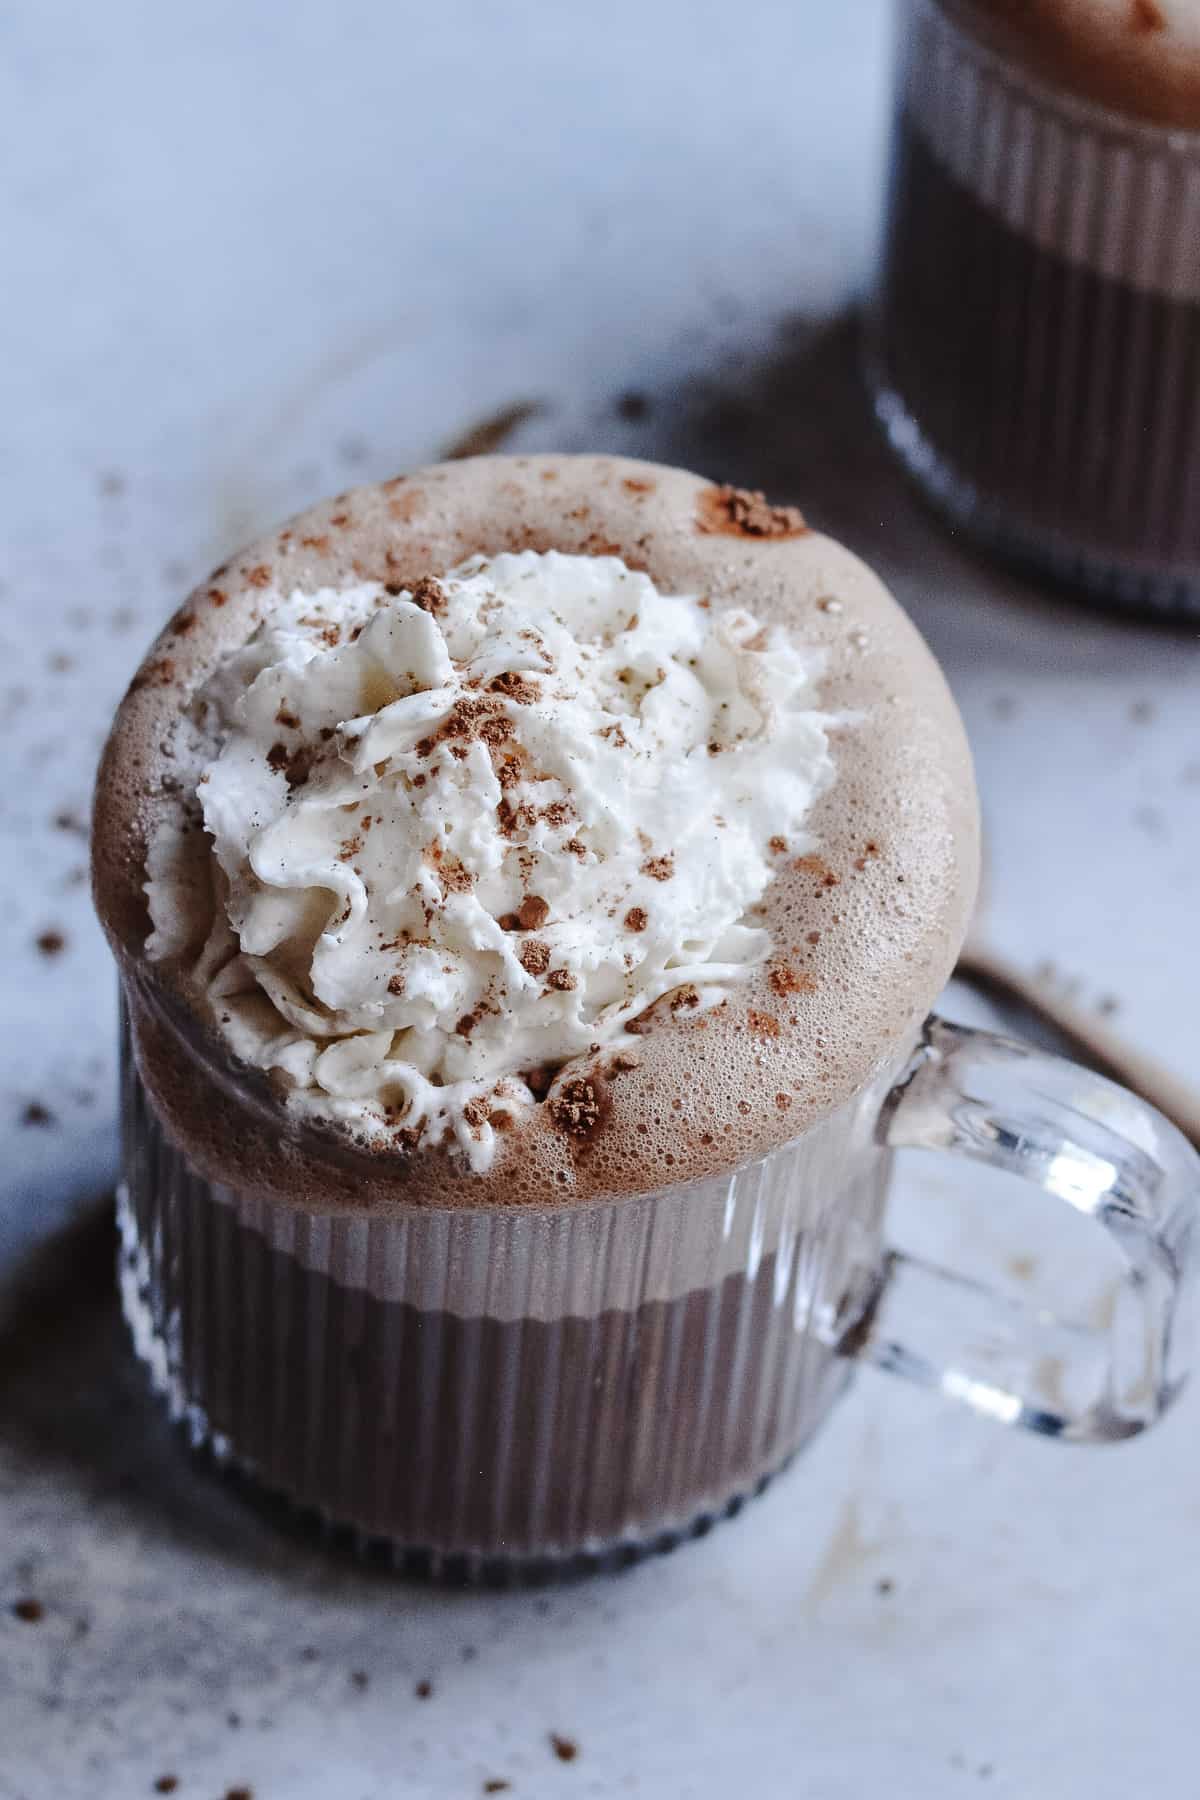 Whip cream on top of hot chocolate in a glass mug.